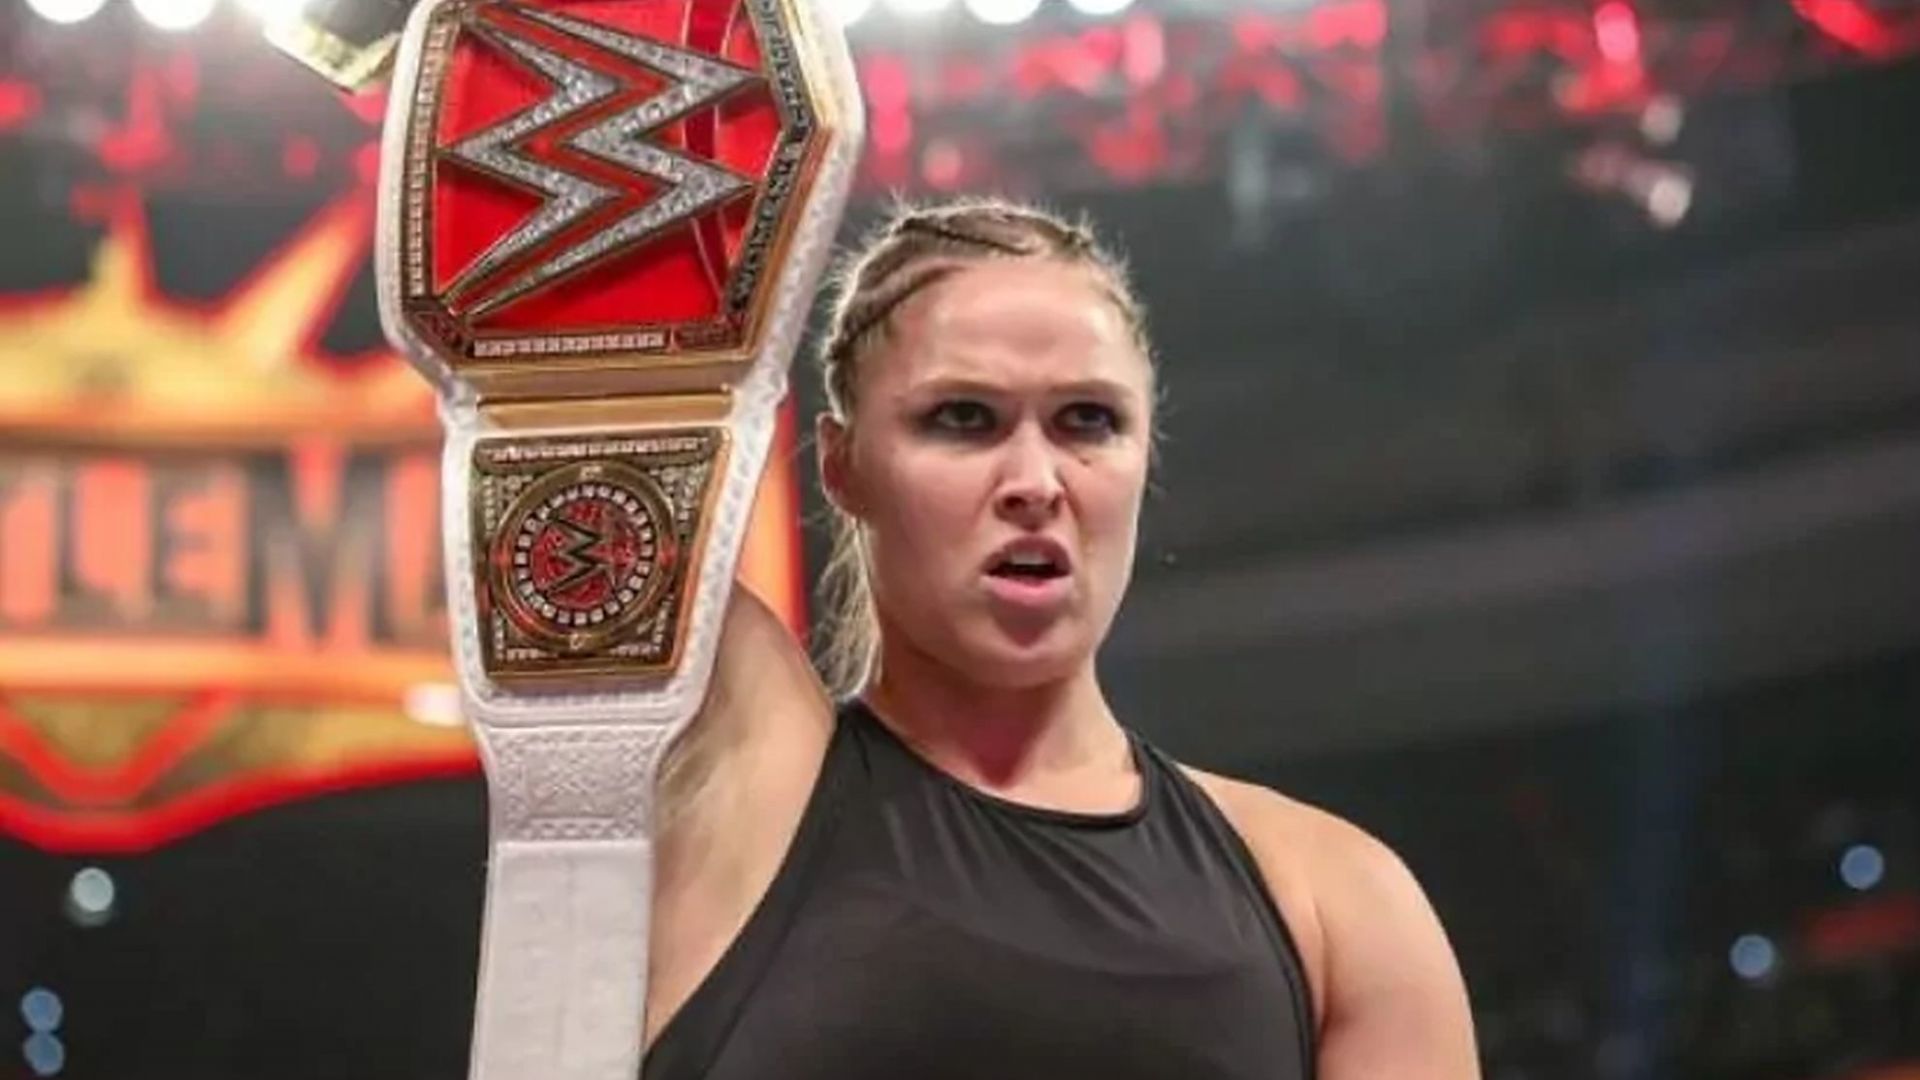 The baddest of the bad...Ronda Rousey!